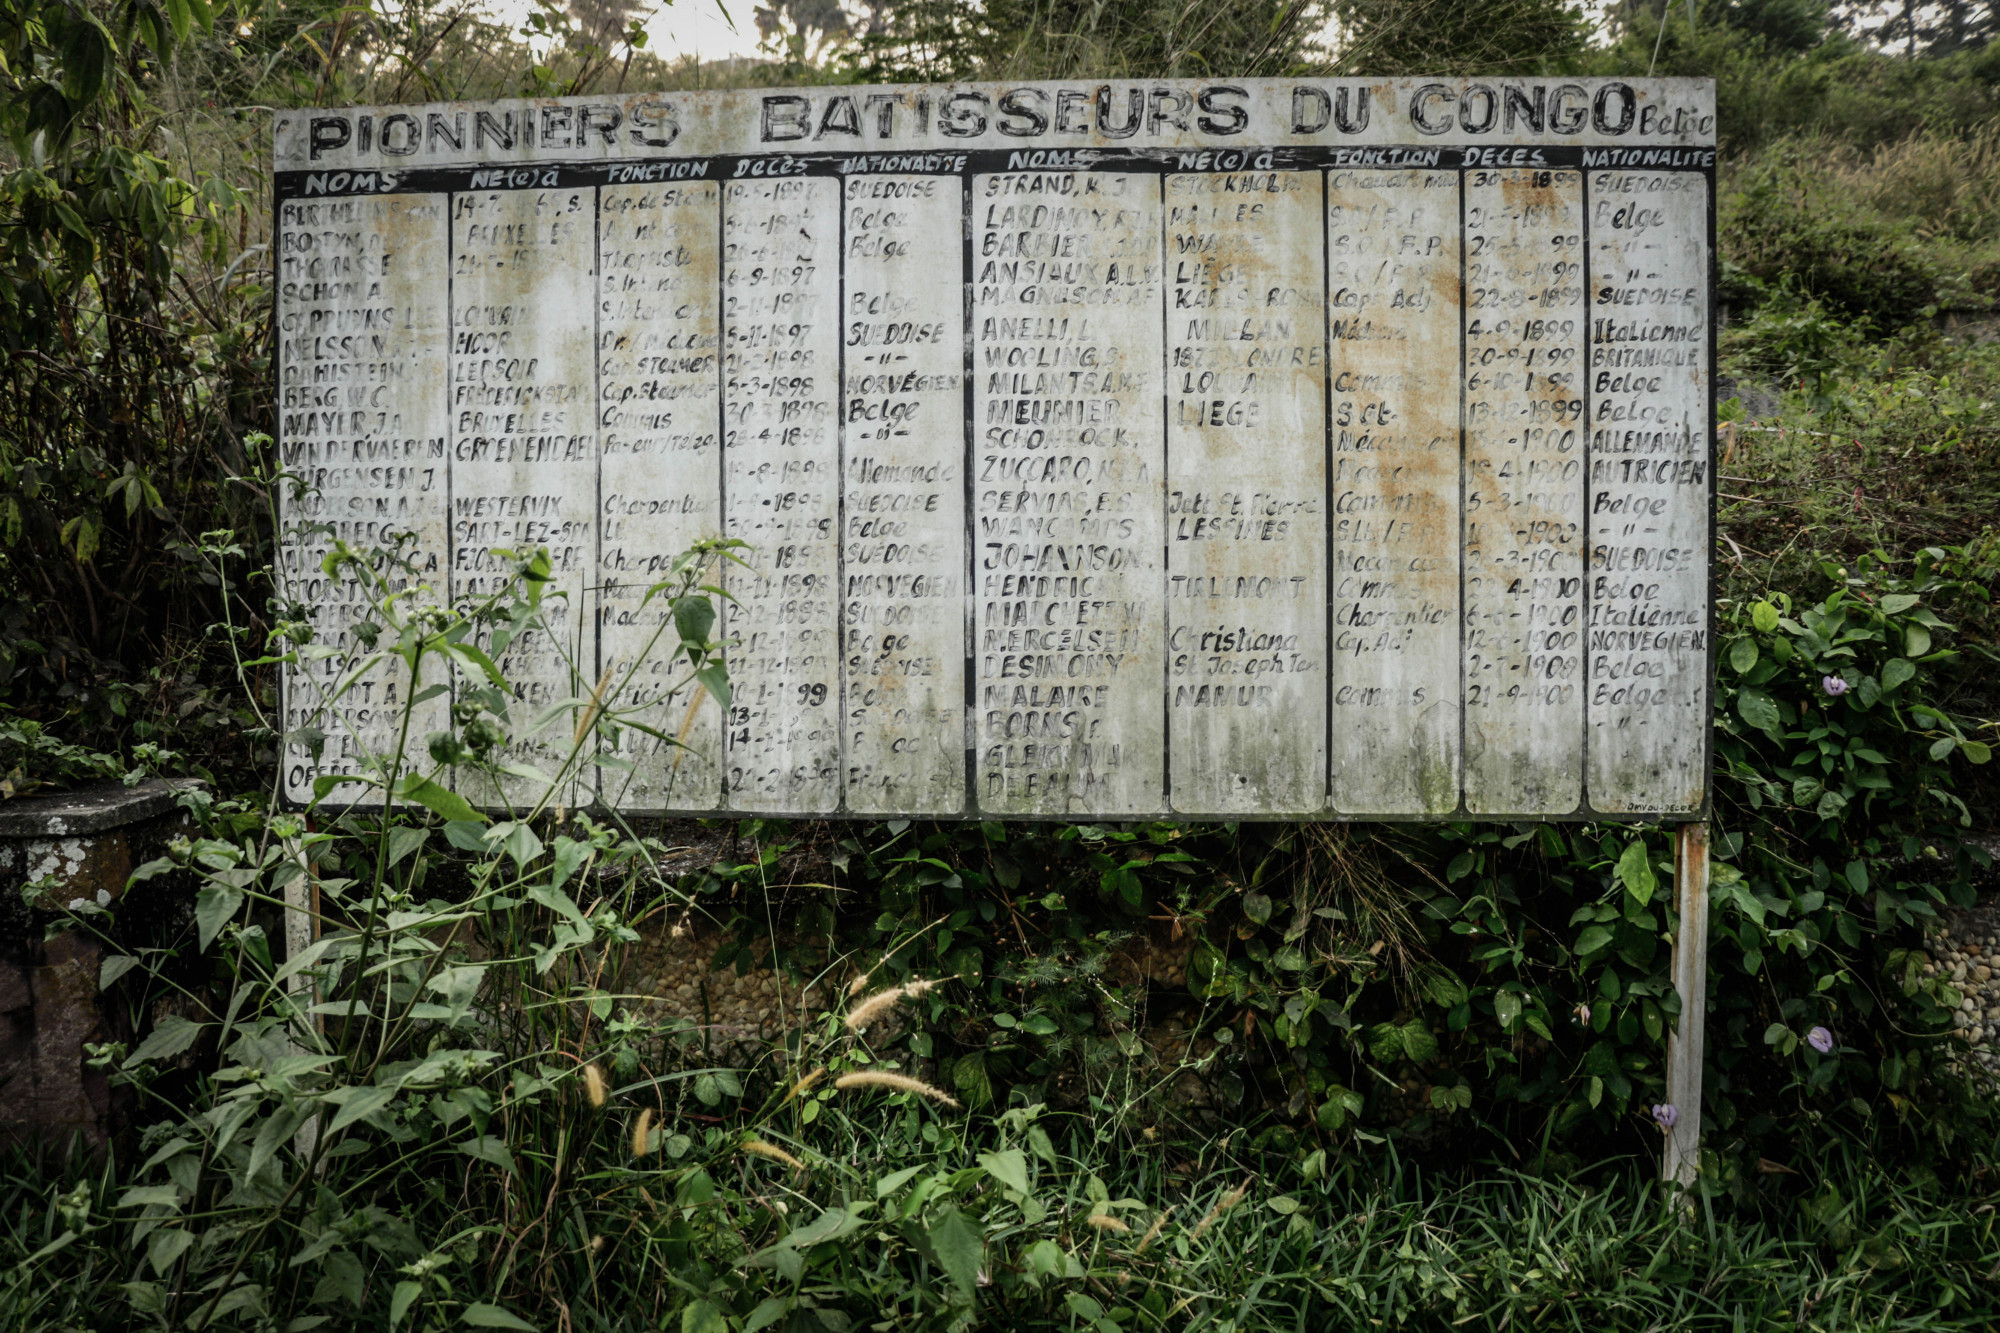 The names of Europeans and their nationalities are listed on a sign board at the Pioneers cemetery at the Parc Presidentiel, Mont Ngaliema, in Kinshasa, last week. Countless Europeans died during the pre-colonial and colonial era of Western exploration into Congo, many of them from illness and disease. Photos : Kinshasa, Democratic Republic of Congo, June 2020 © Justin Makangara for Fondation Carmignac